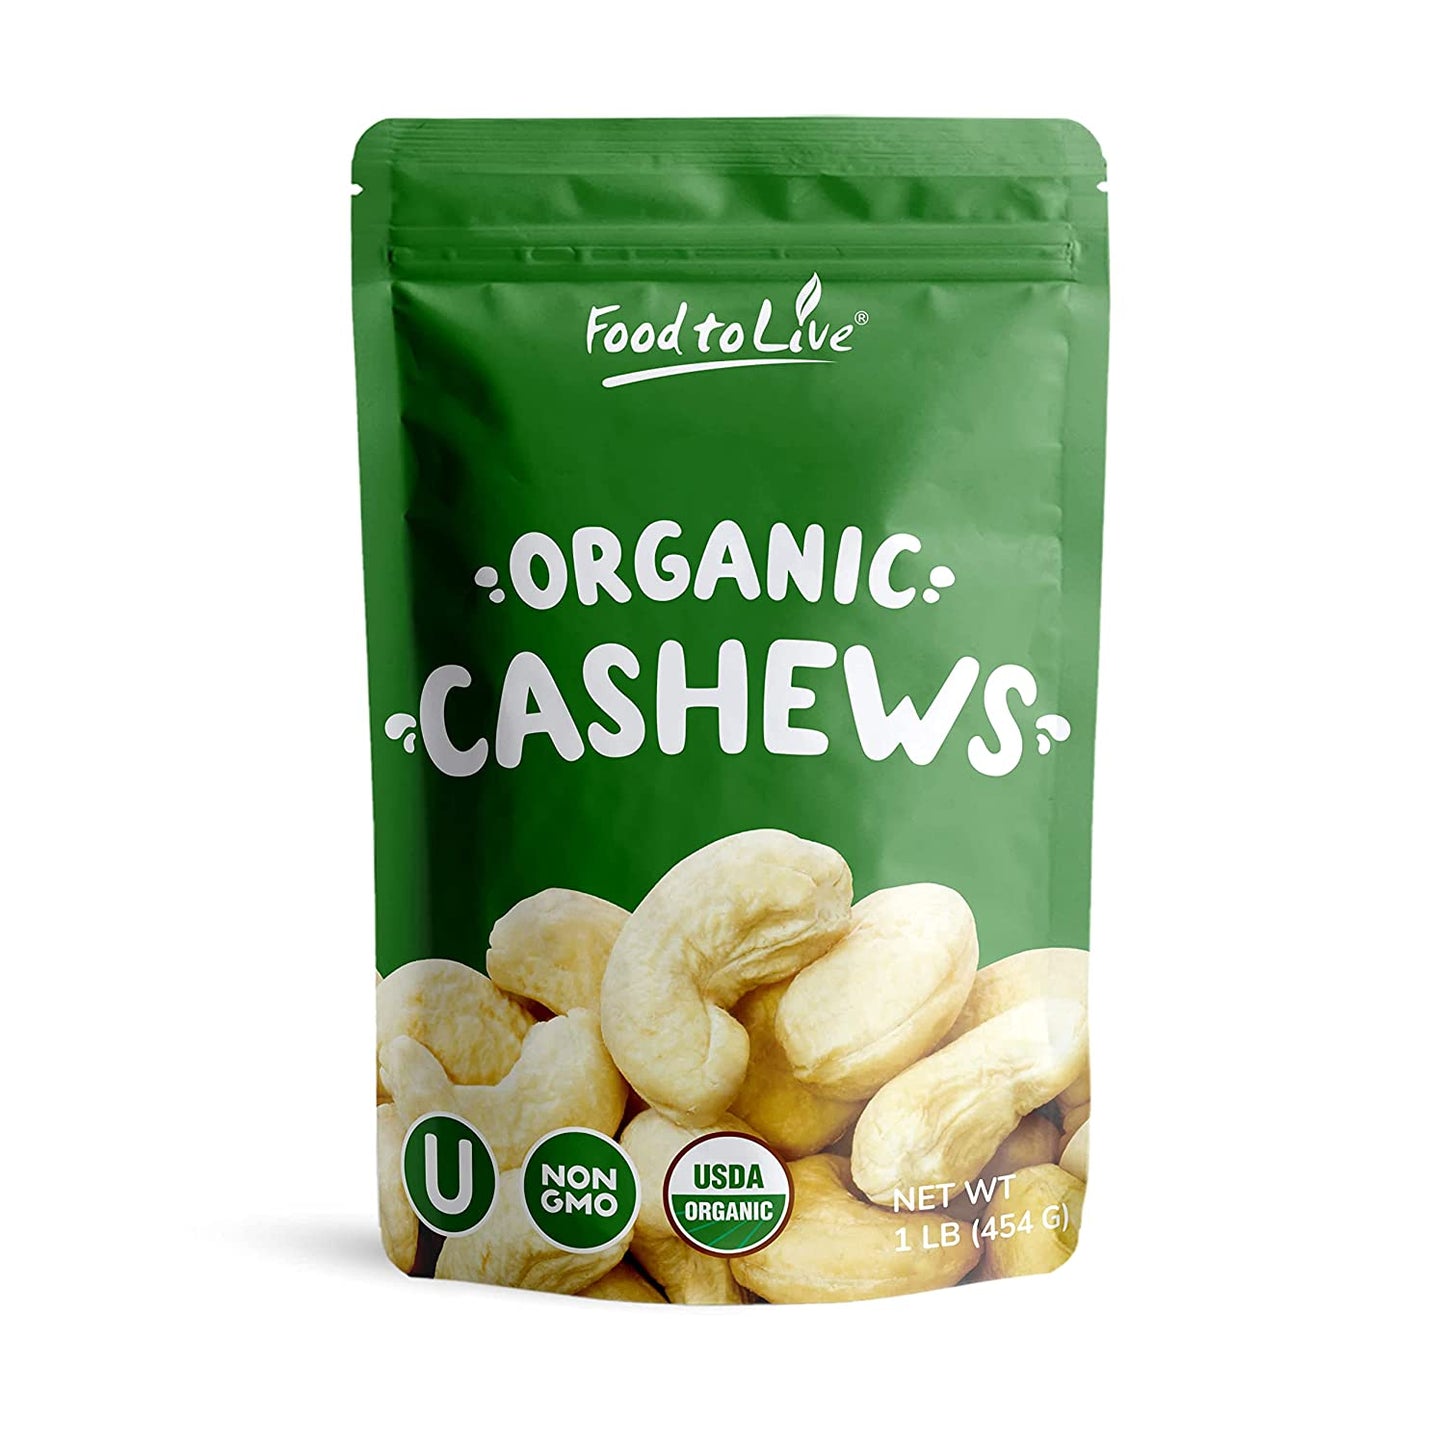 Organic Dry Roasted Whole Cashews with Himalayan Salt – Non-GMO, Oven Roasted and Lightly Salted Nuts, No Oil Added, Vegan, Kosher, Bulk. High in Protein. Great Wholesome and Crunchy Snack